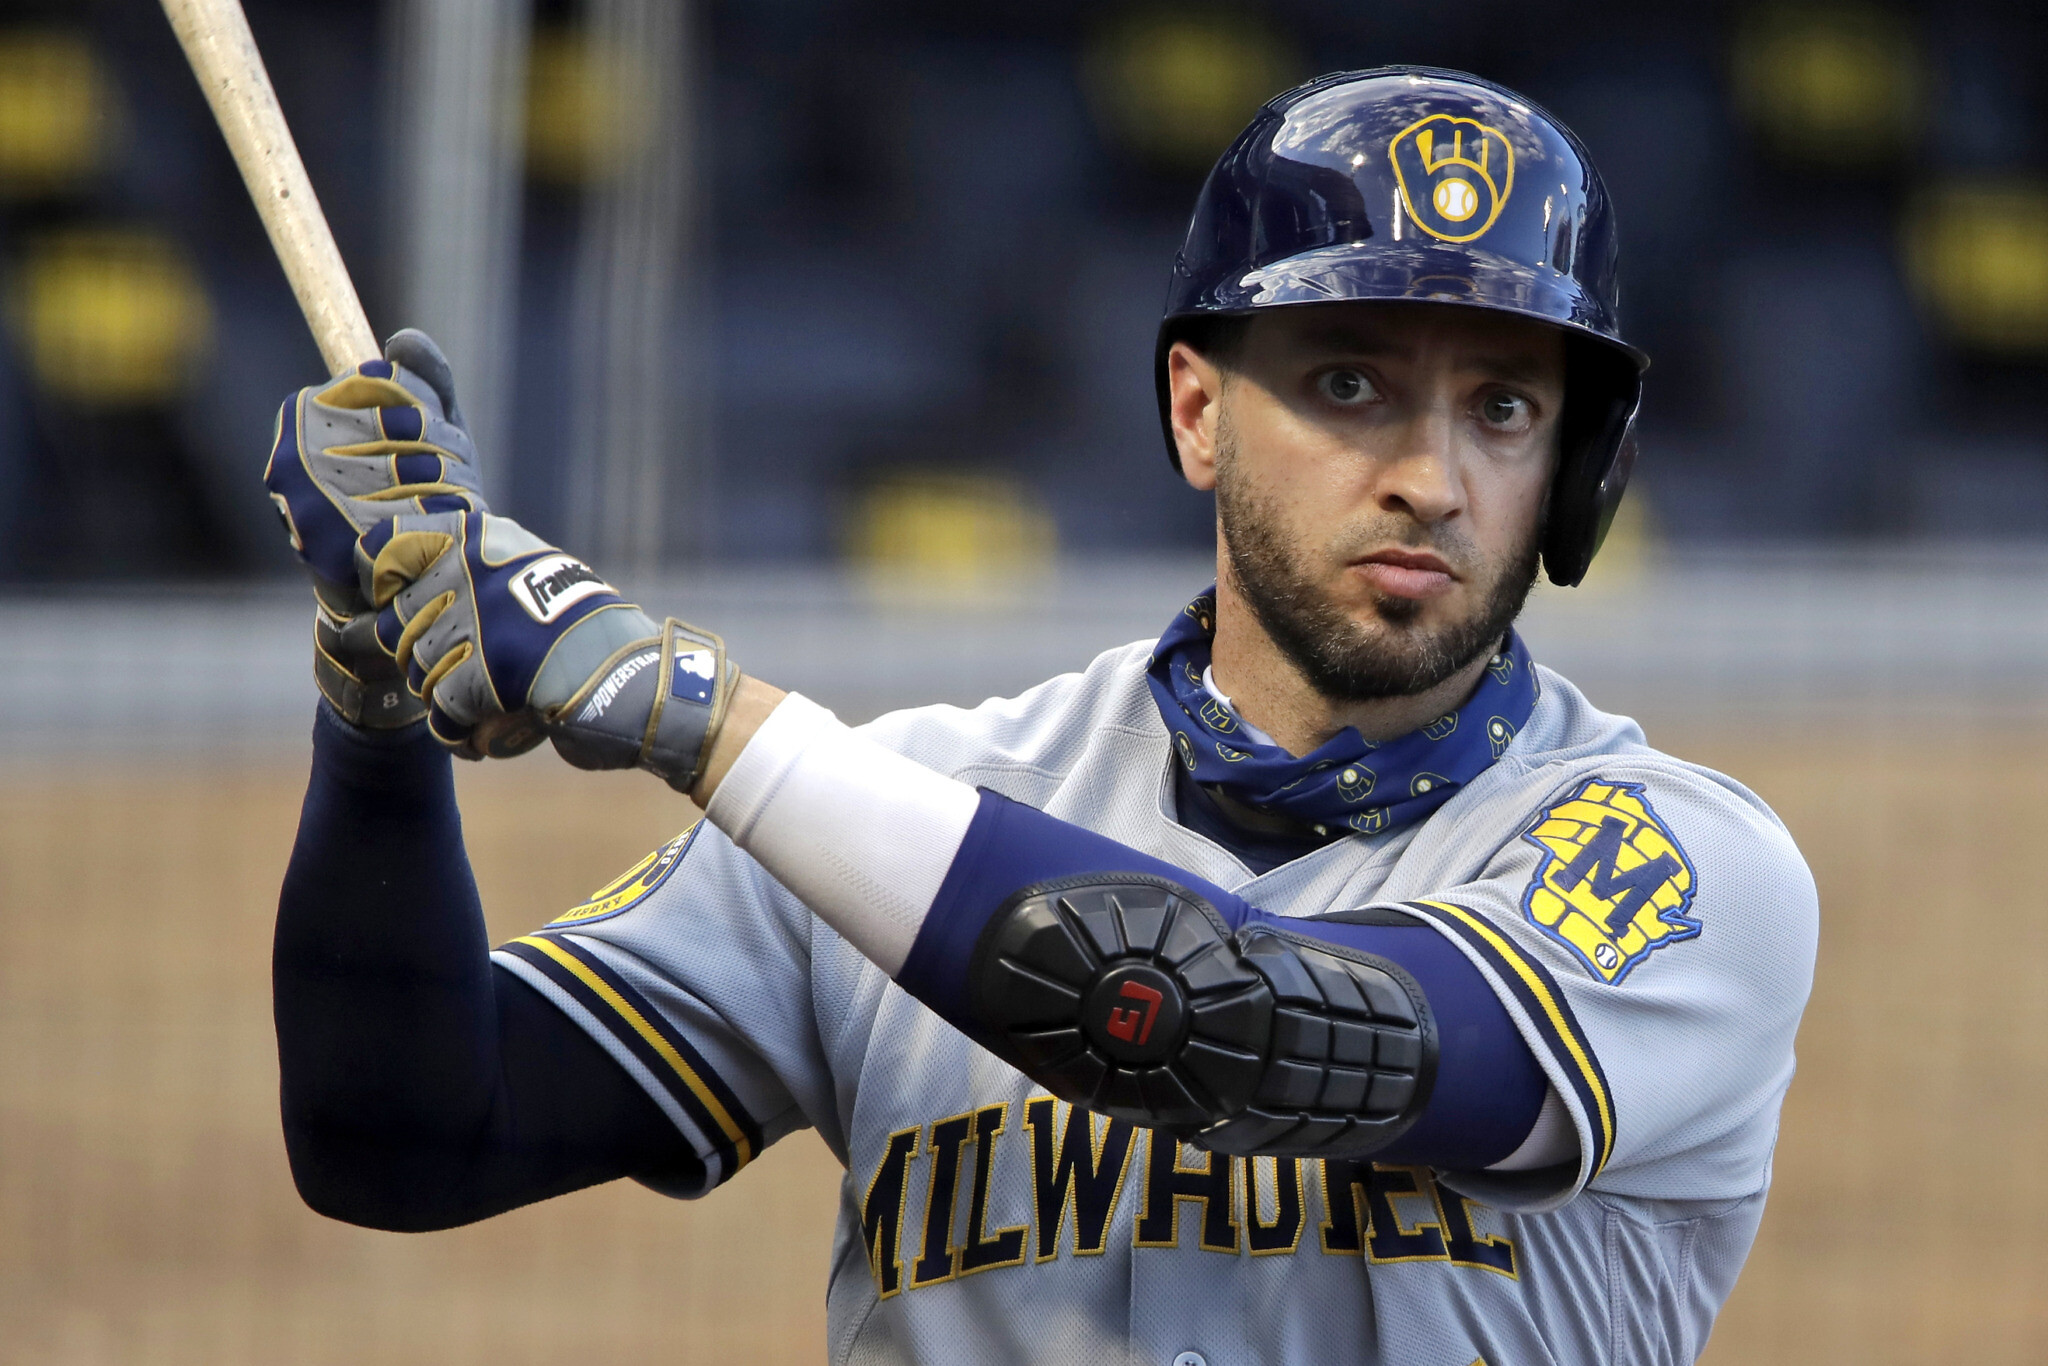 Hebrew Hammer' Ryan Braun retires from MLB after illustrious 14-year career | The Times of Israel